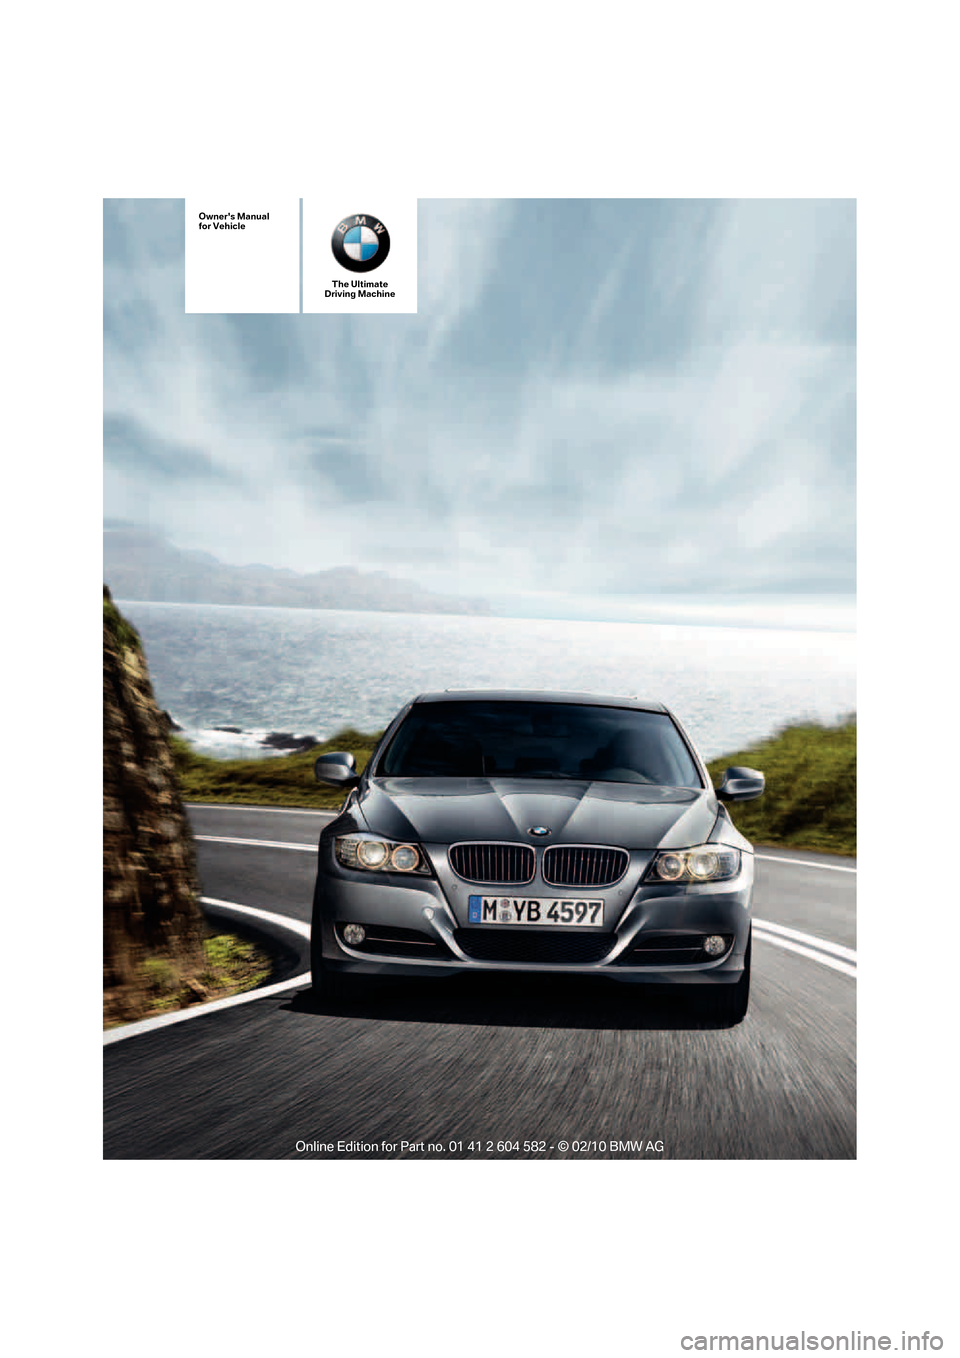 BMW 335I 2011 E90 Owners Manual The Ultimate
Driving Machine
Owners Manual
for Vehicle 